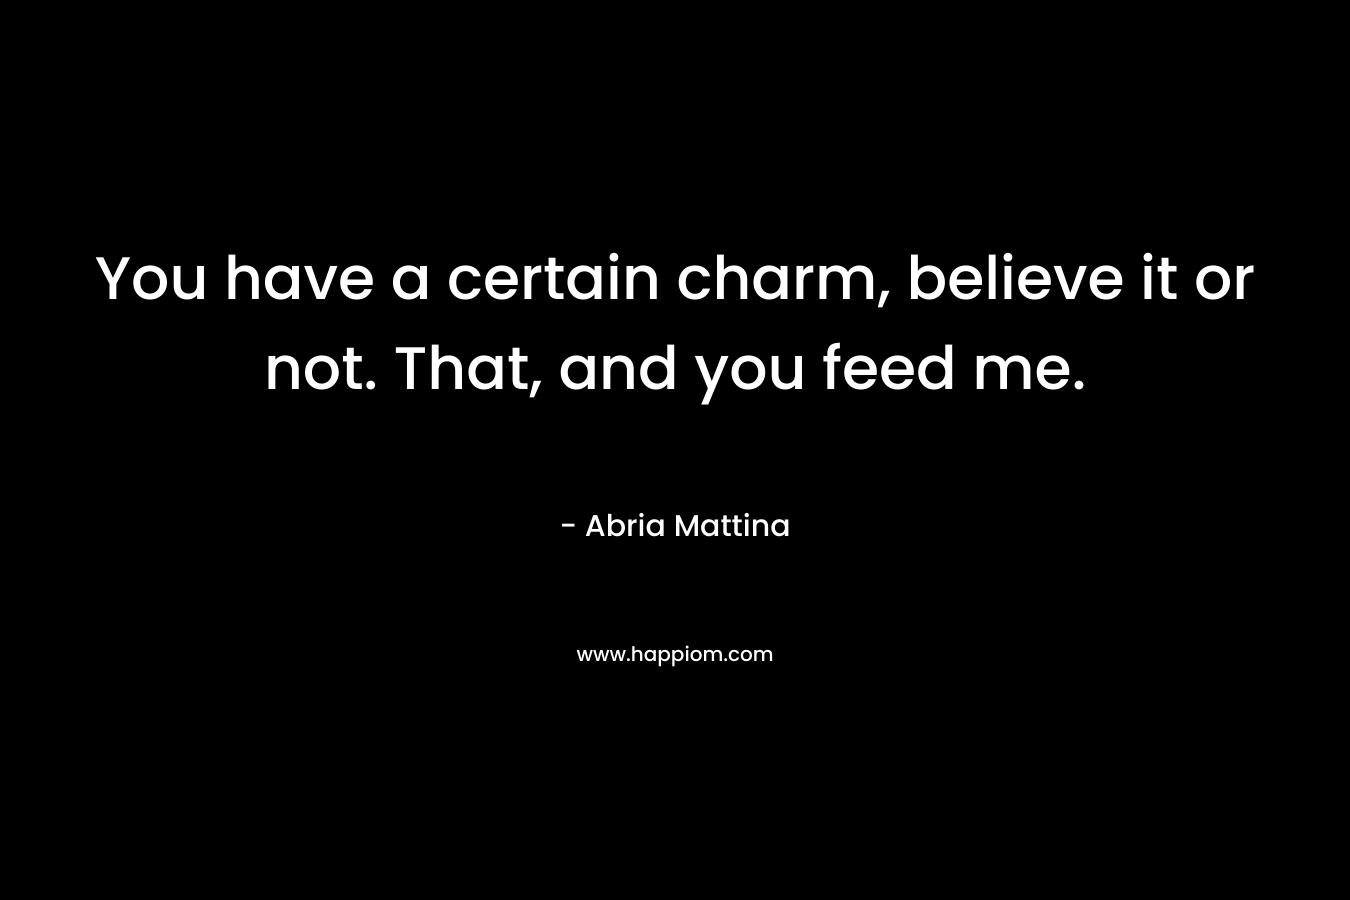 You have a certain charm, believe it or not. That, and you feed me. – Abria Mattina